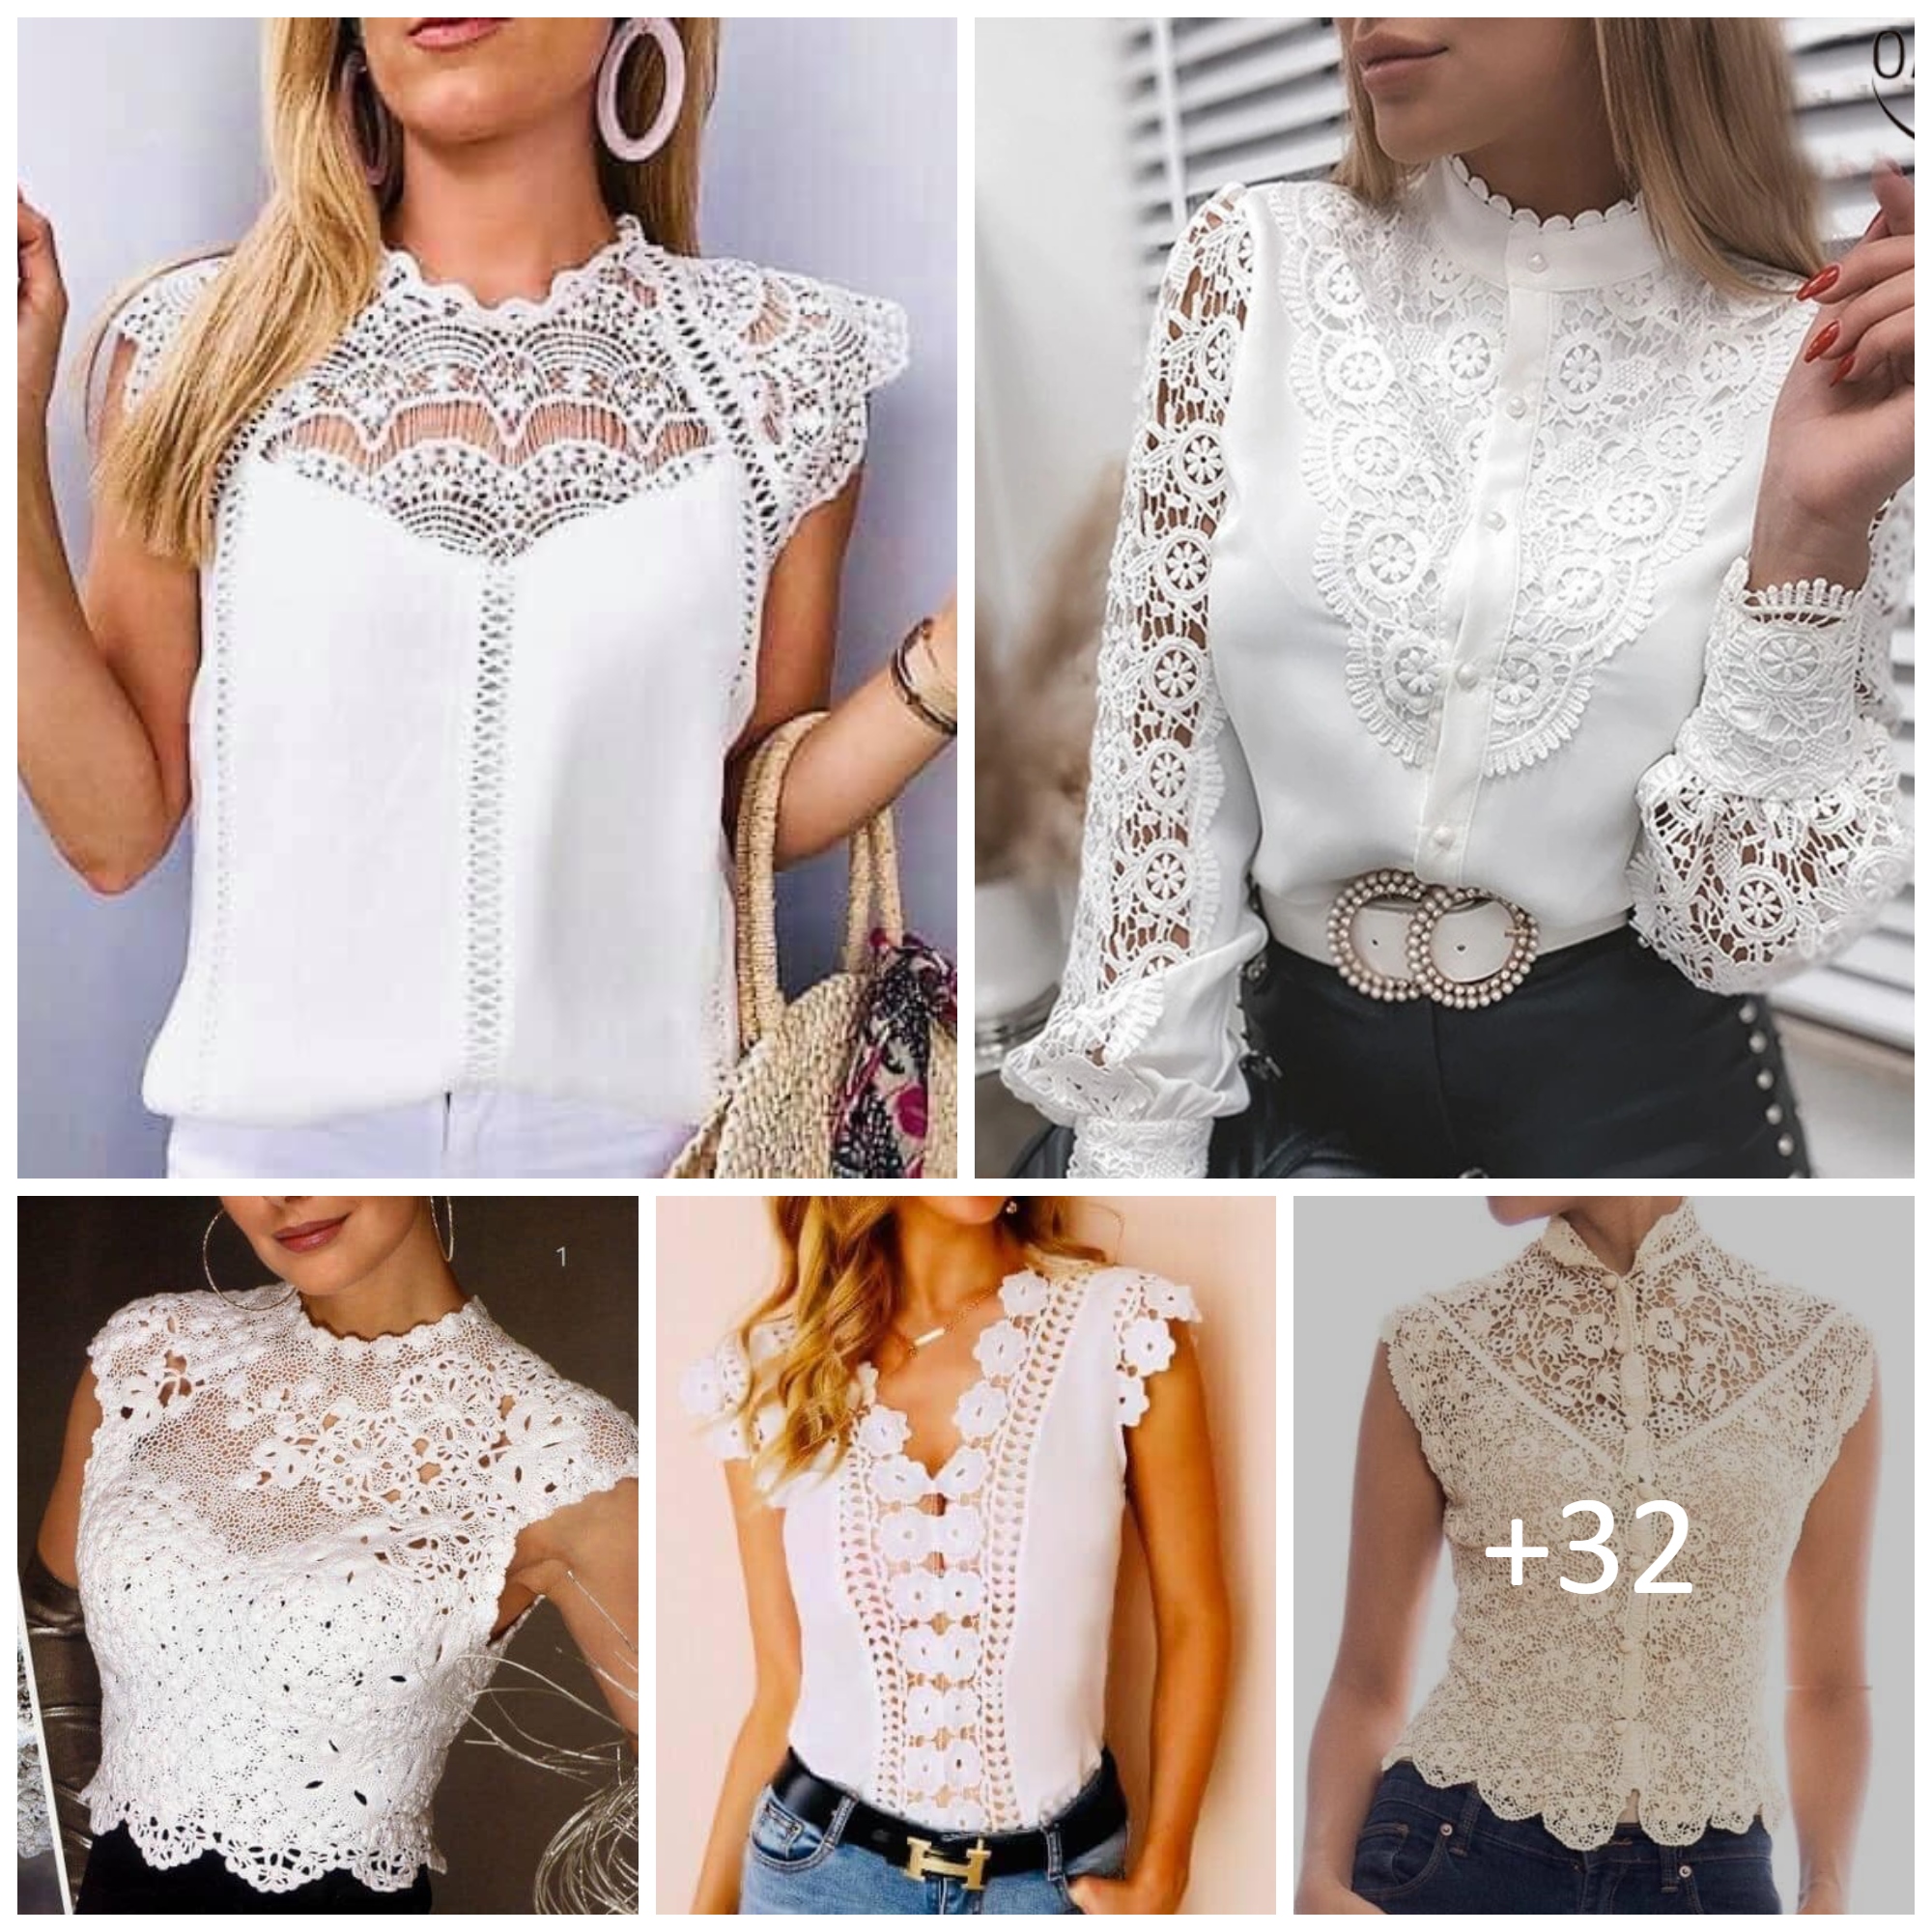 Chic White Lace Top Ideas